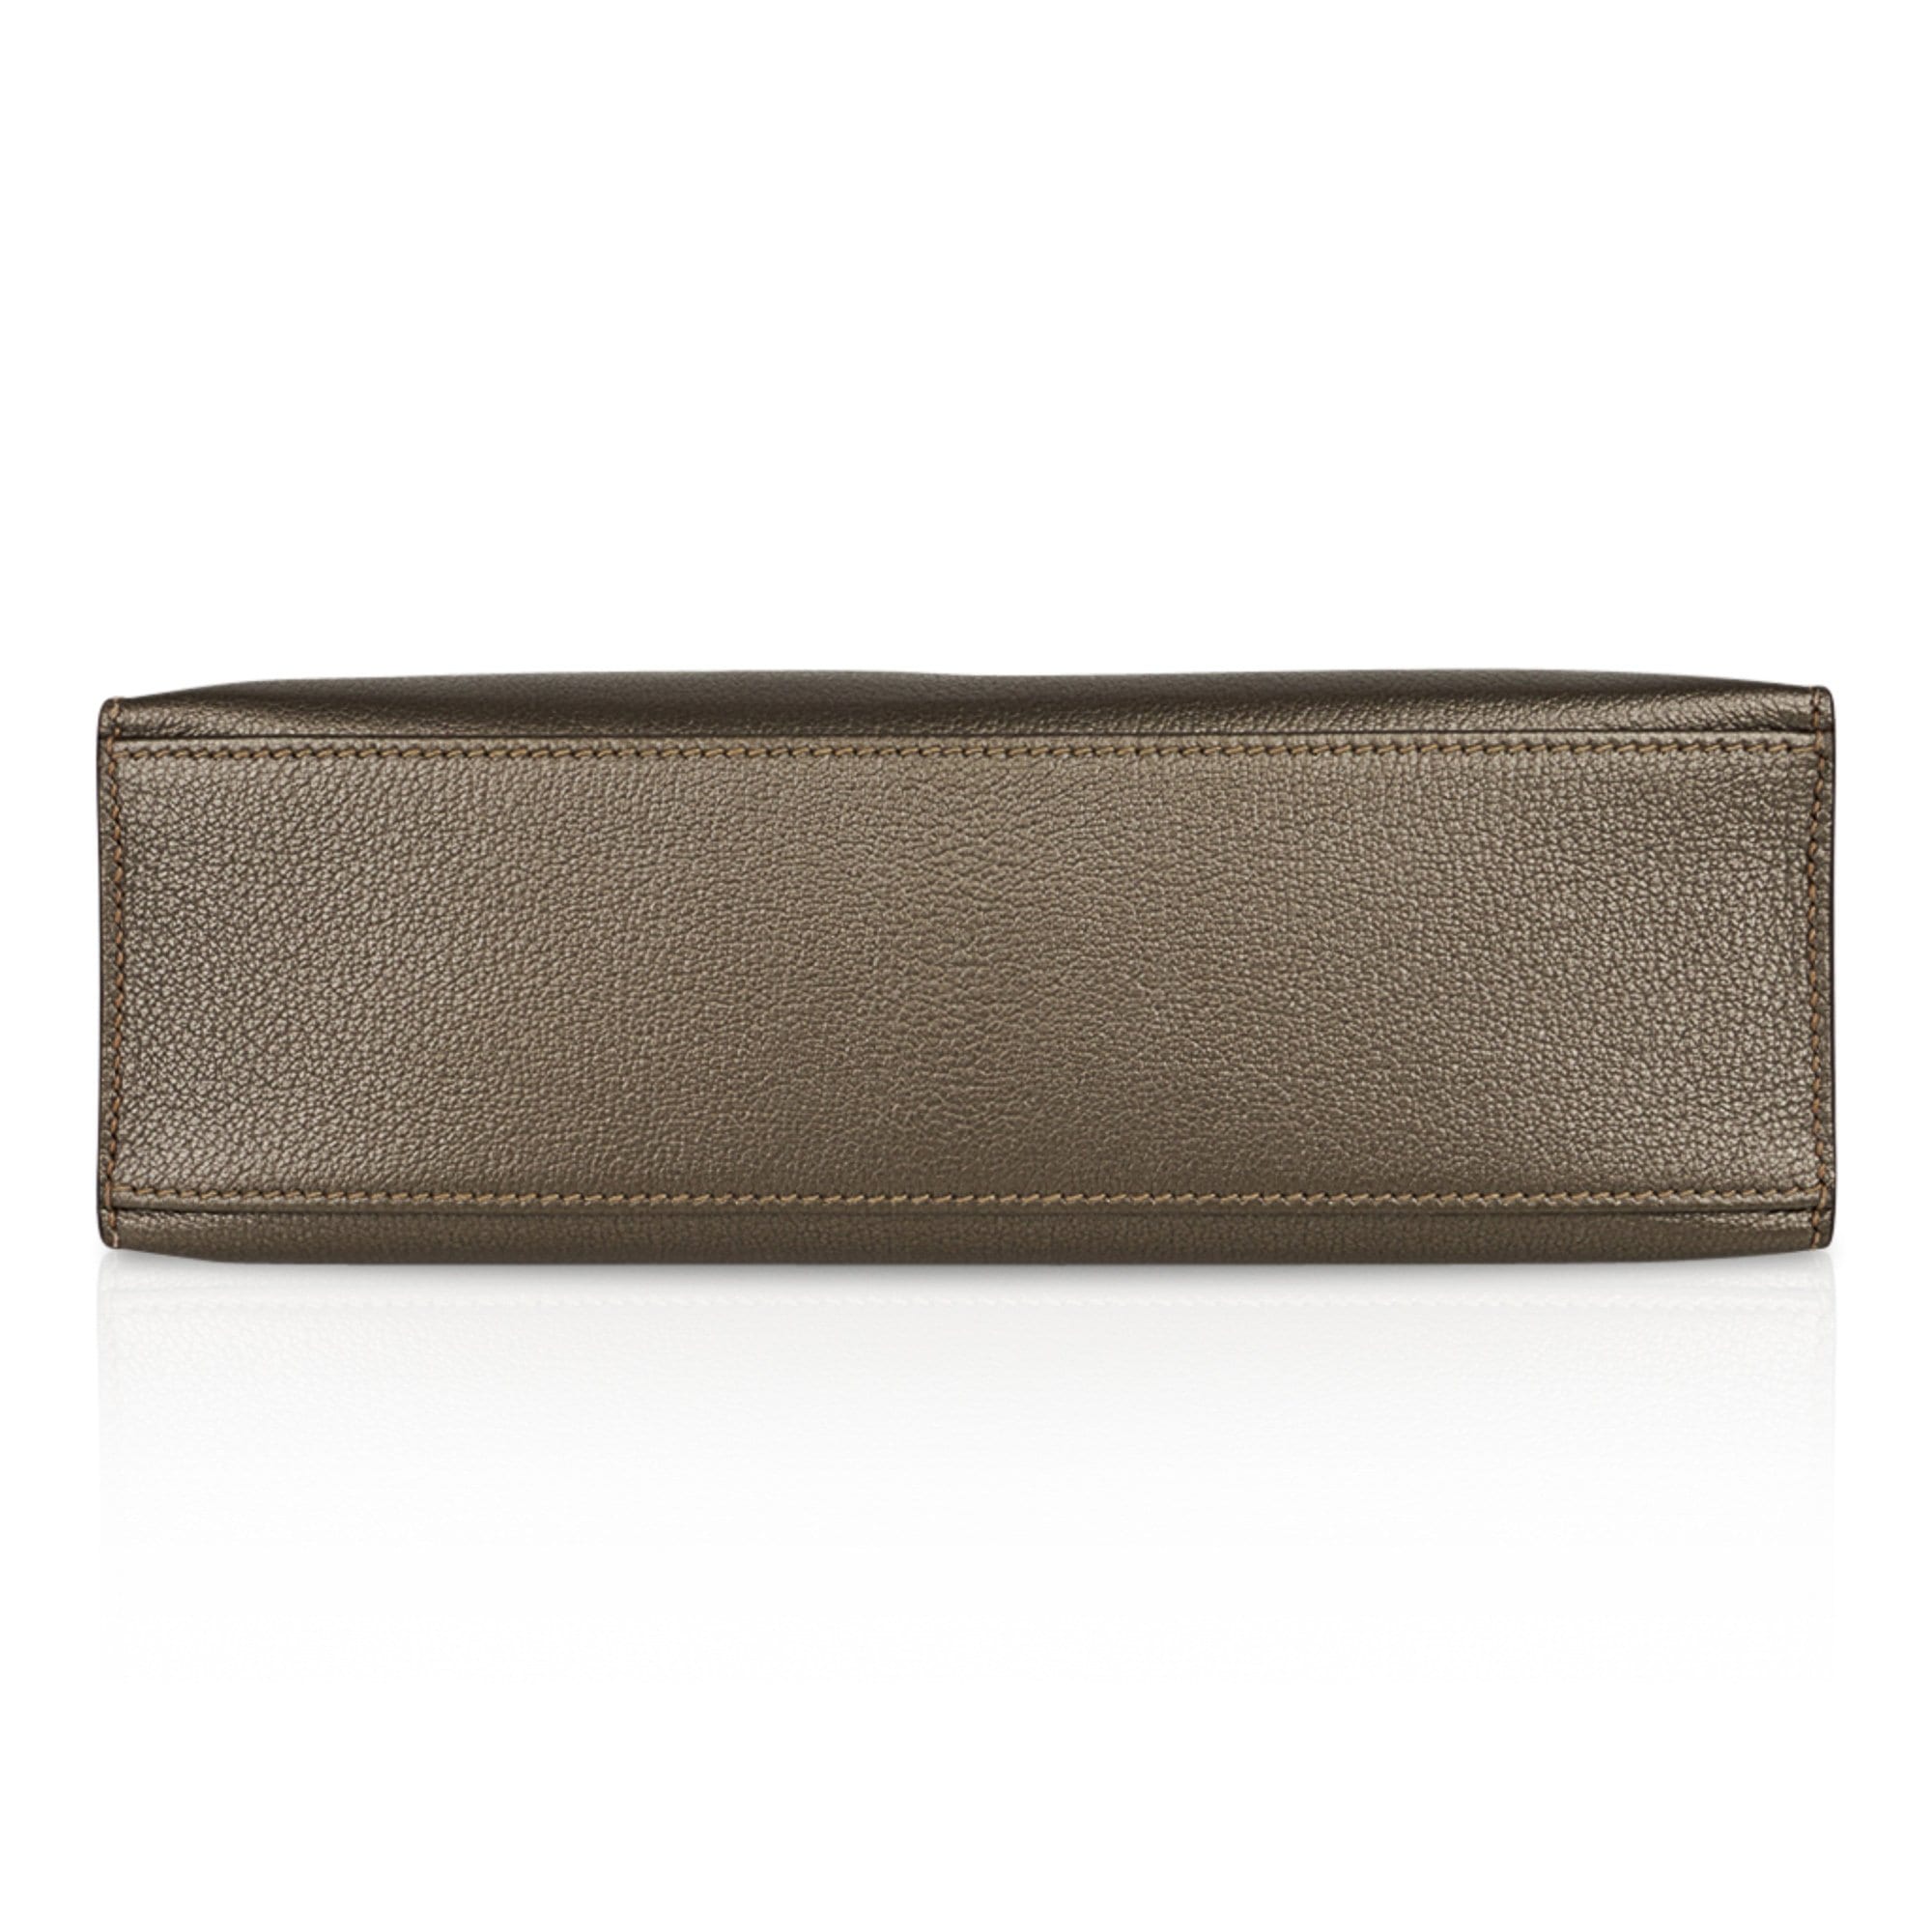 Everything about the Most Popular Hermès Clutch: the Hermès Kelly Pochette, Handbags and Accessories